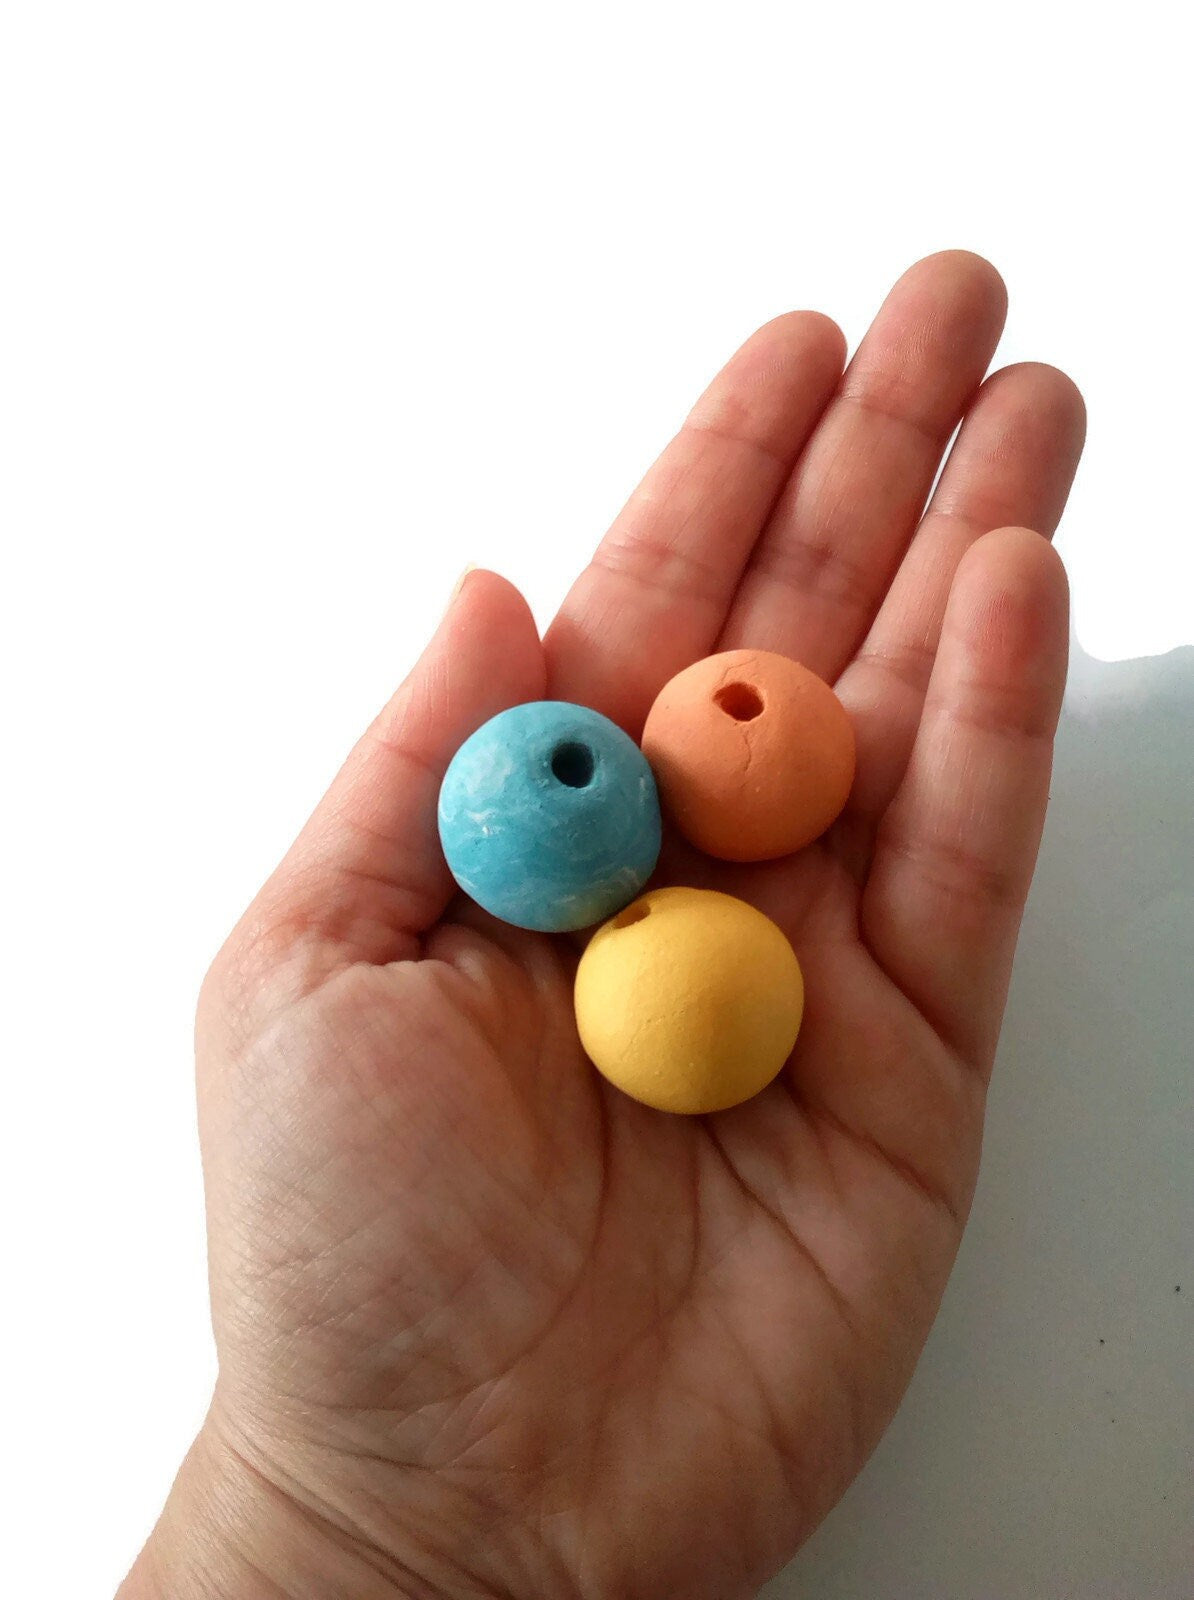 3Pc 25mm Handmade Ceramic Beads For Jewelry Making, Matte Beads For Crafts, Decorating, Macrame Beads Large Hole, Unique Mixed Clay Beads - Ceramica Ana Rafael